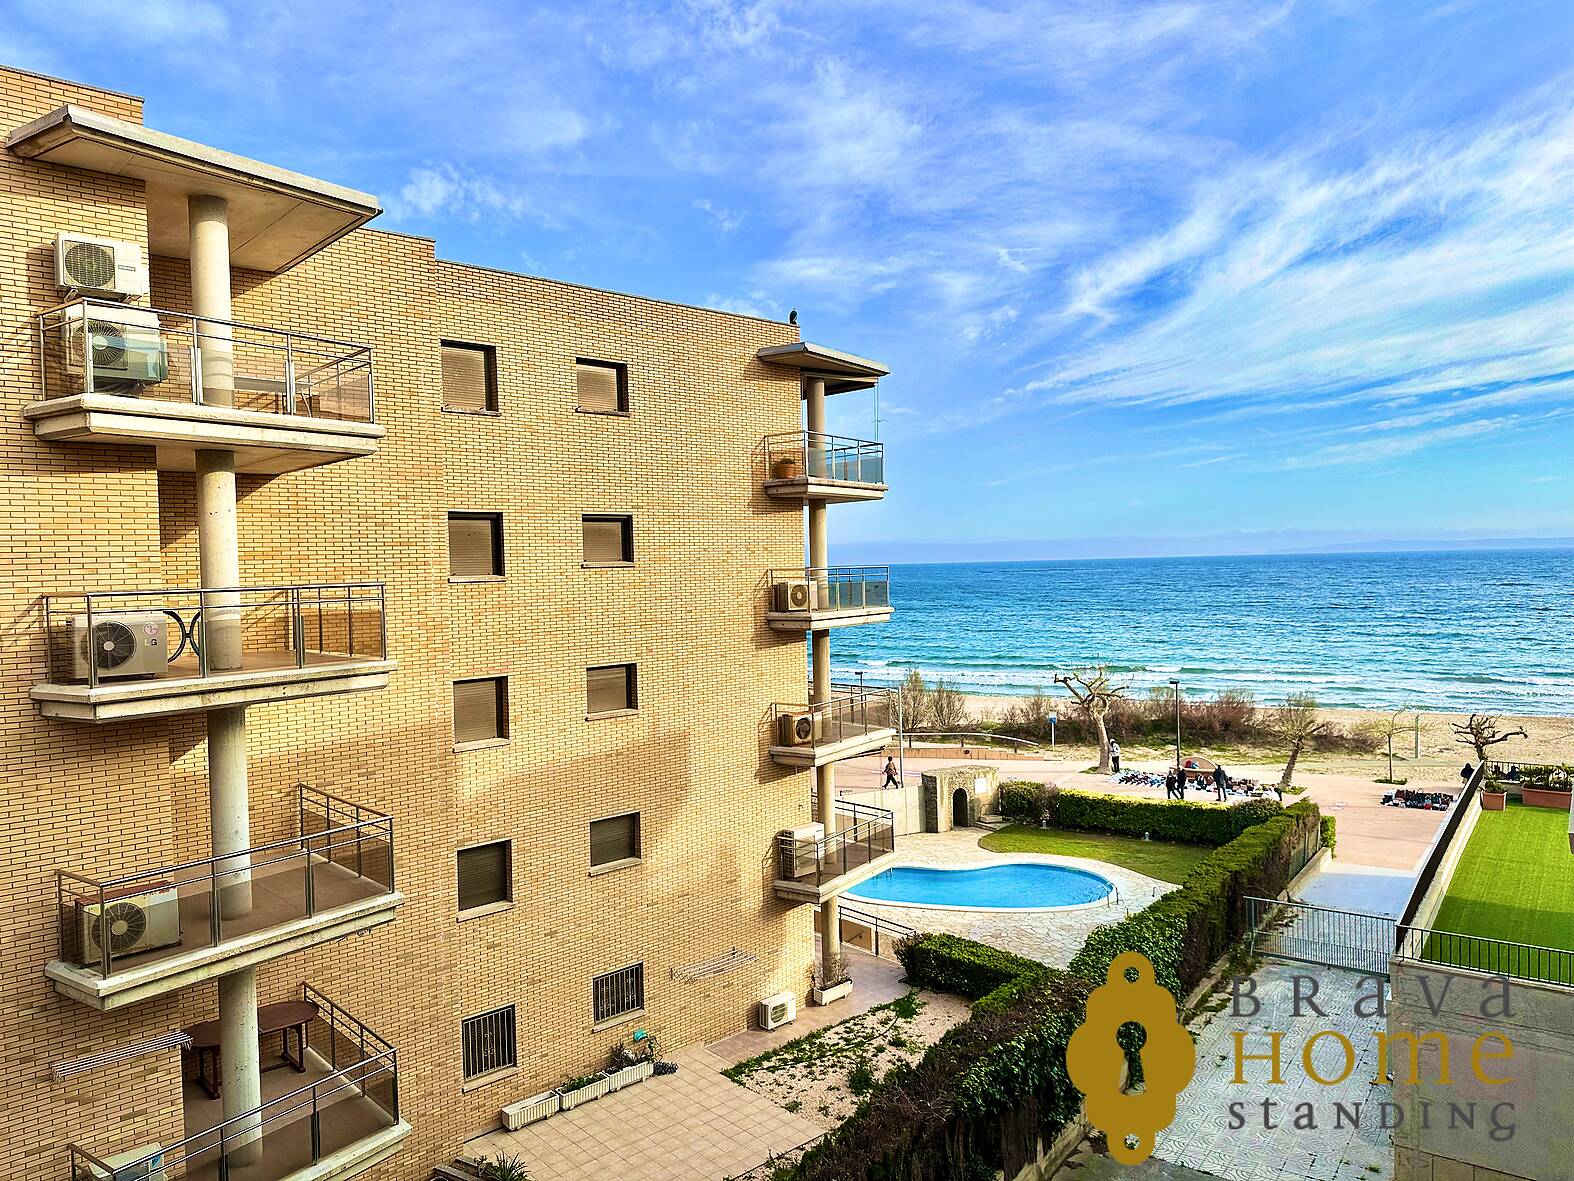 Beautiful studio with sea view, for sale in Rosas - Salatar